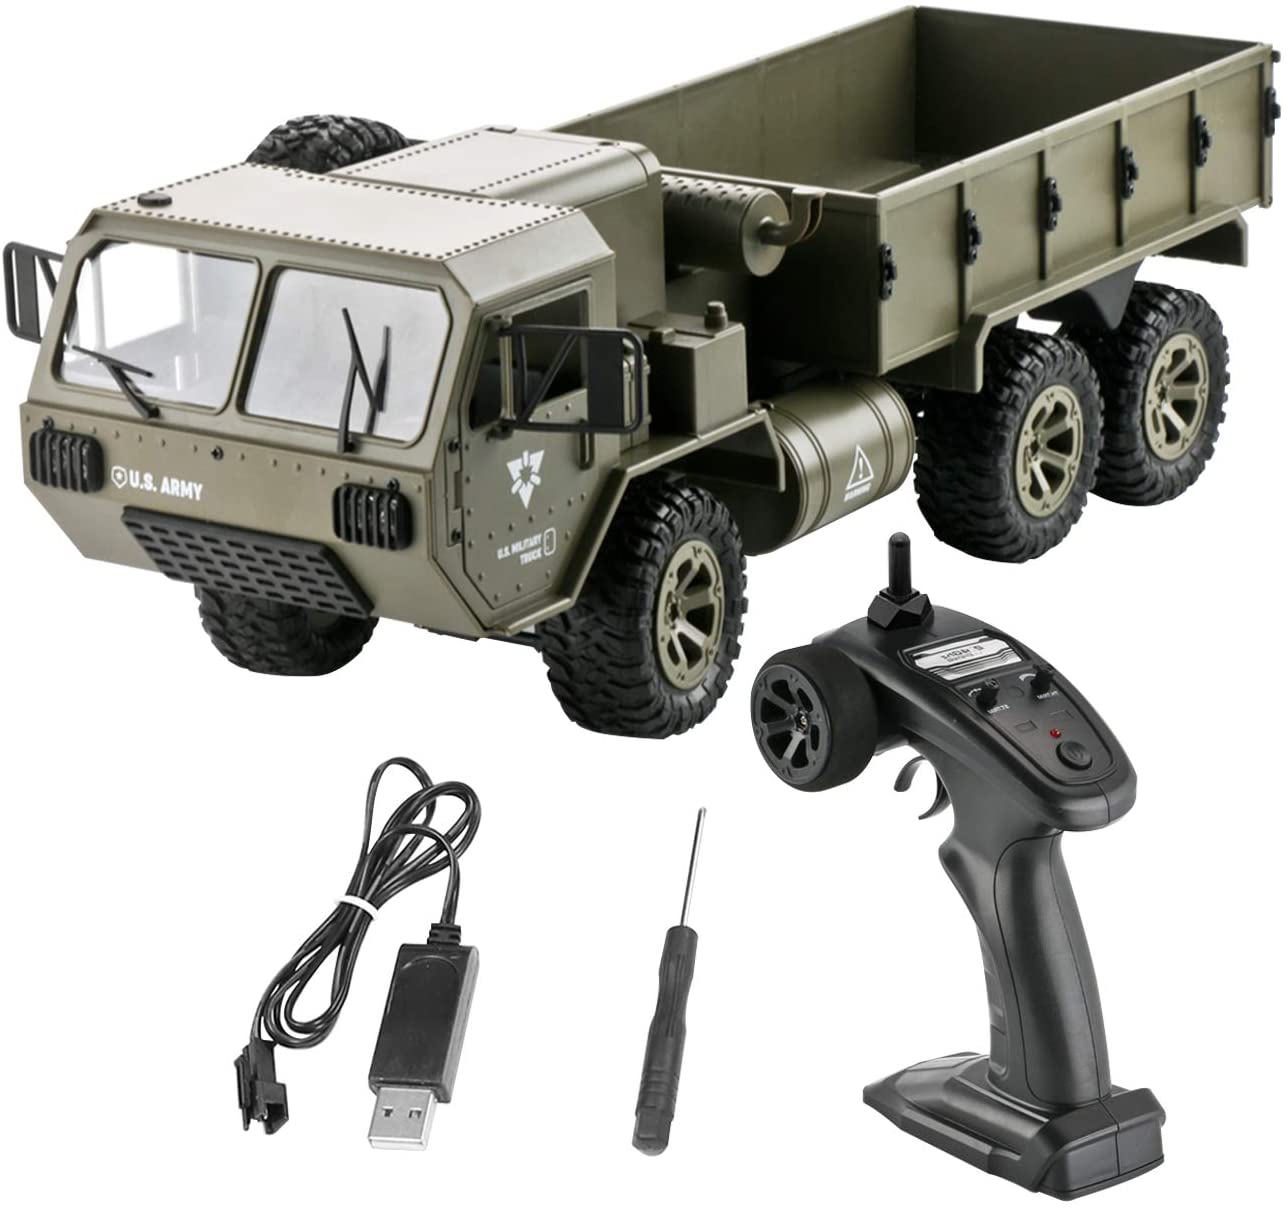 Army Truck Toy with Light /& Sound Heavy Duty Alloy Military Vehicle Toy for Kids /& Children 1//20 Pull Back Jeep Car Model /& Doors Can be Opened Green